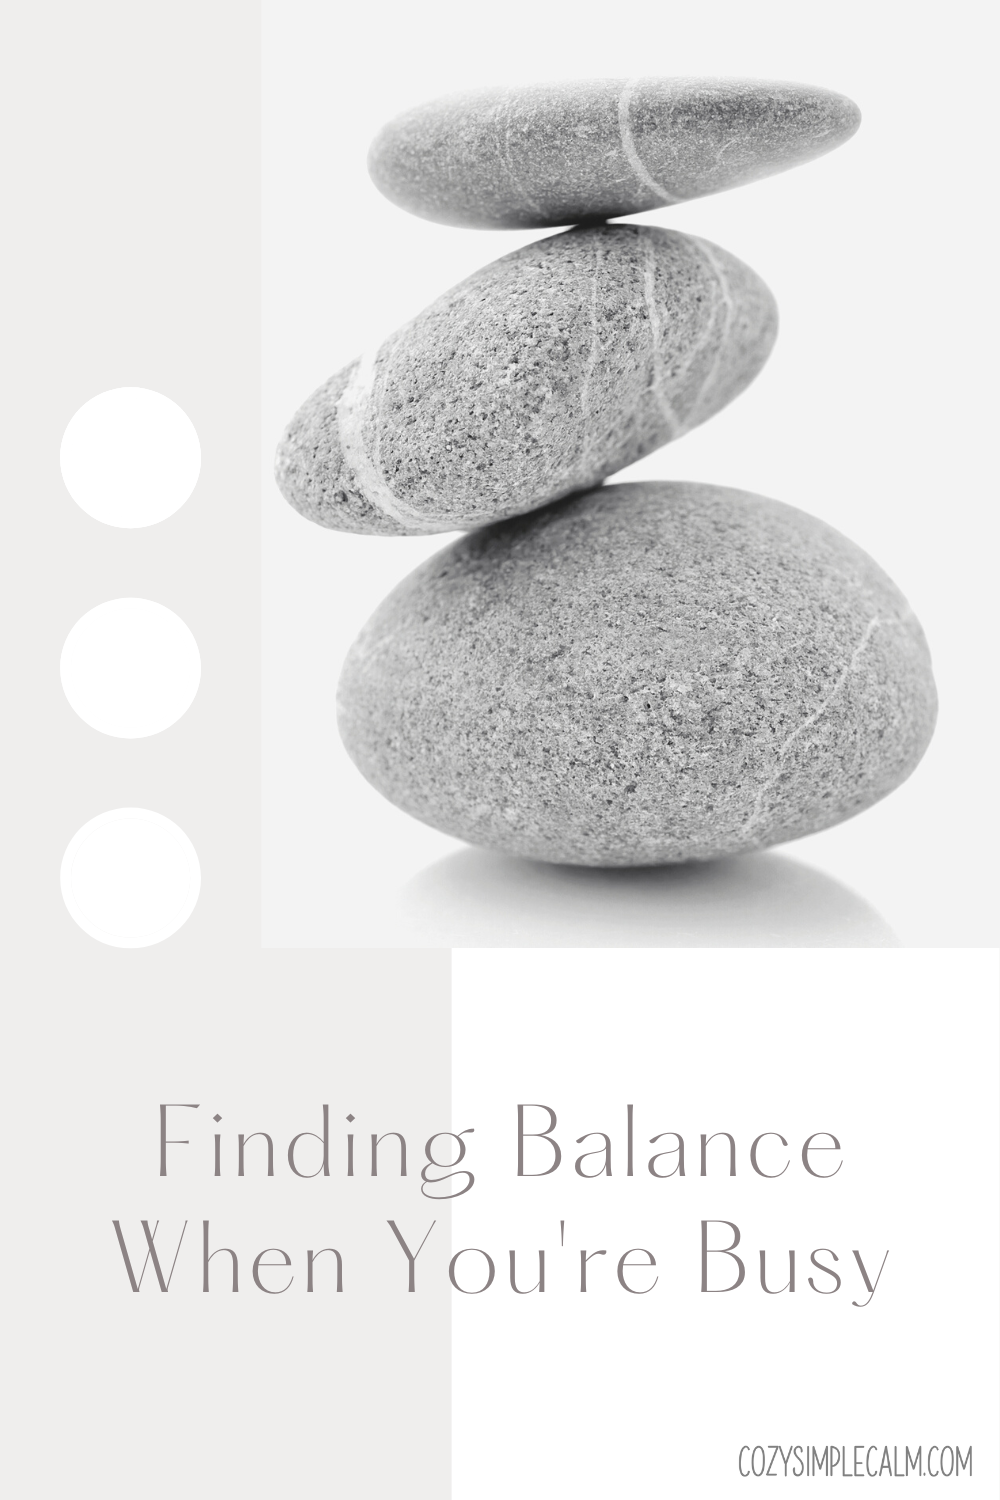 Image of balanced stack of stones - text overlay: Finding Balance When You're Busy